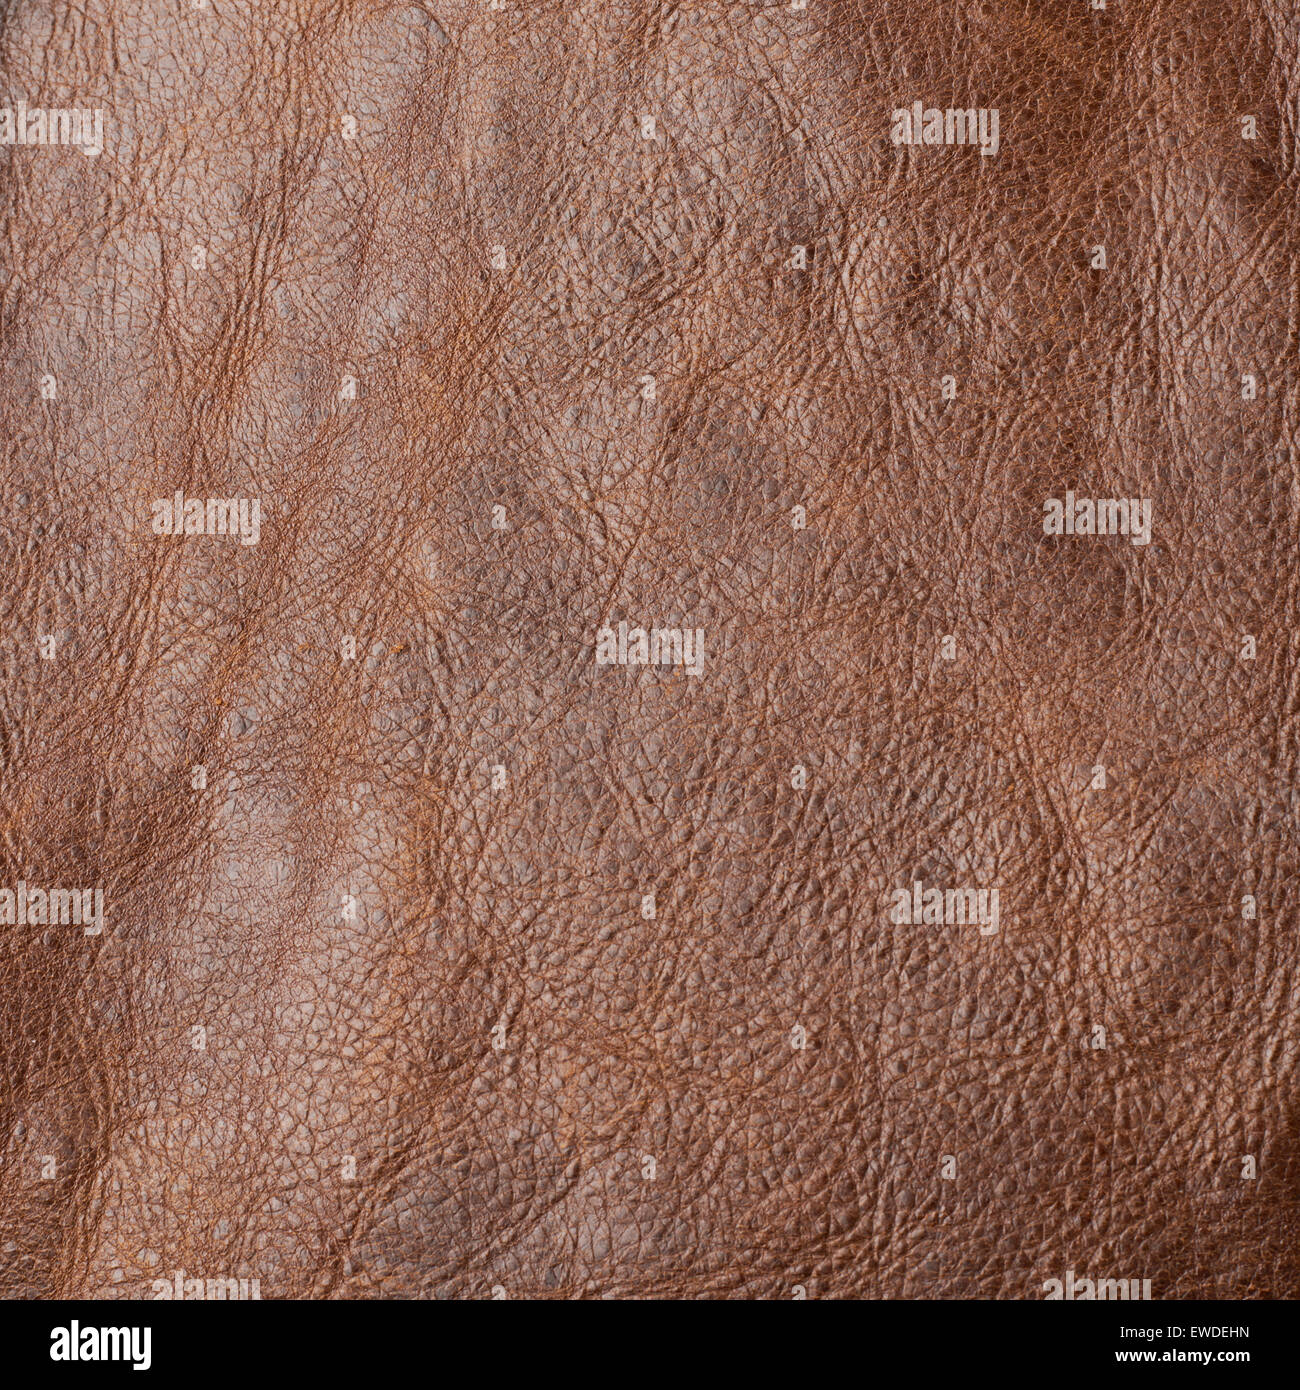 Fragment of a brown leather texture Stock Photo